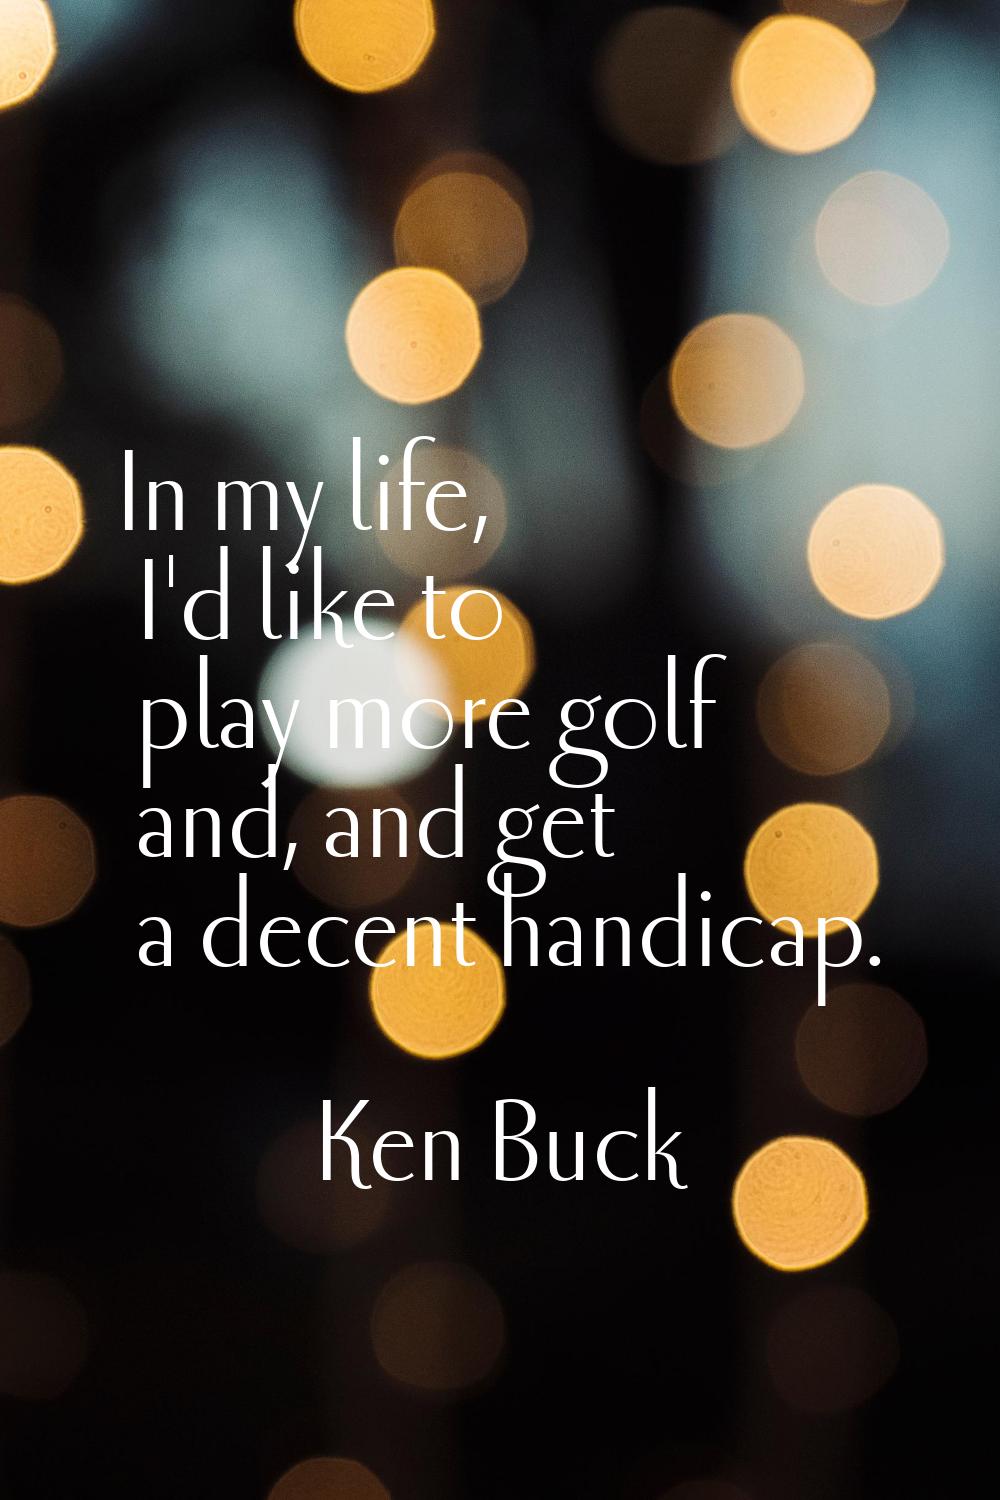 In my life, I'd like to play more golf and, and get a decent handicap.